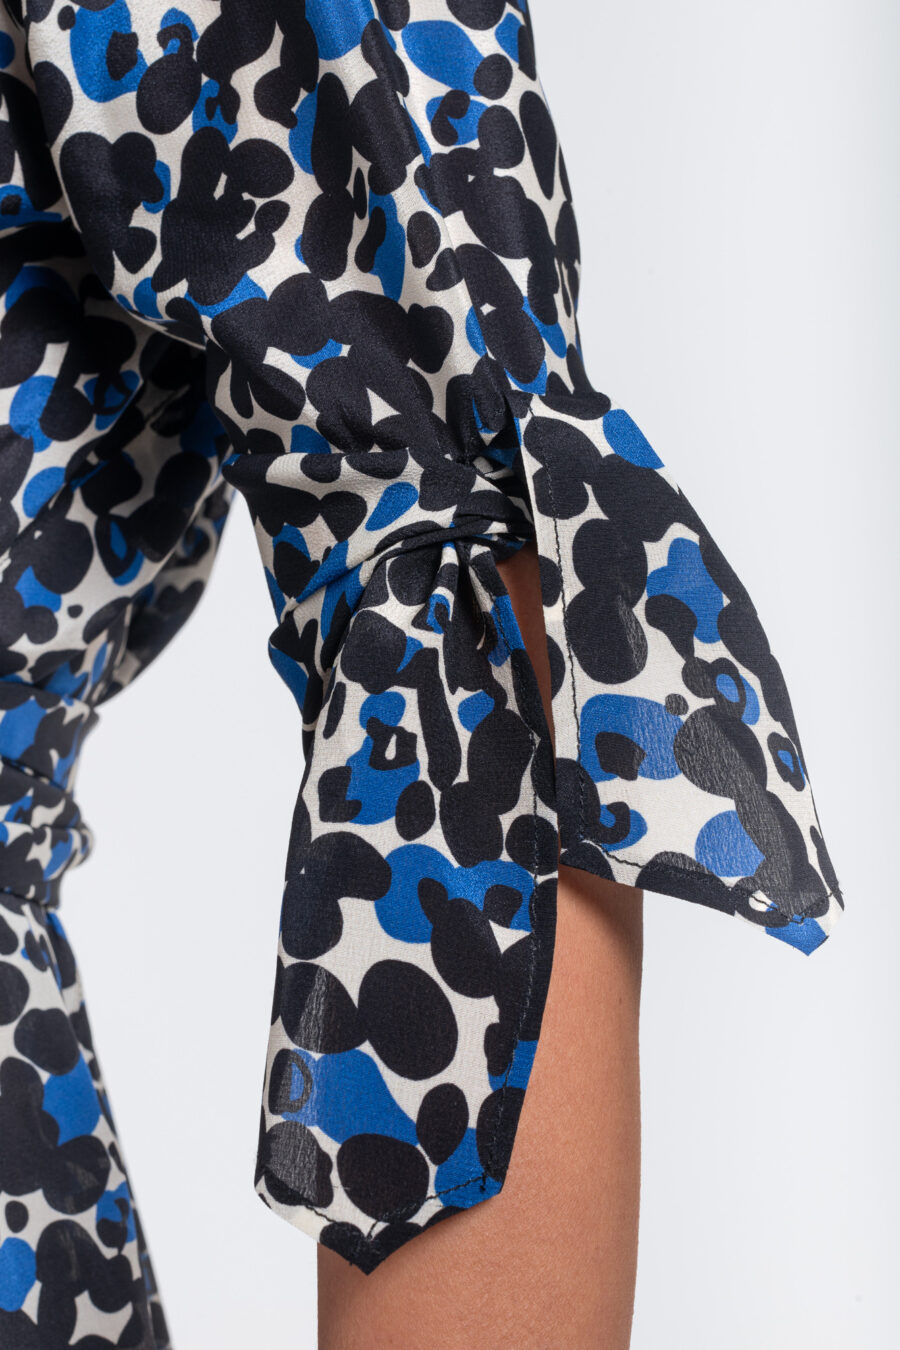 Feminine dress with shawl collar in a abstract blue, black and offwhite vintage print in silk crêpe de chine